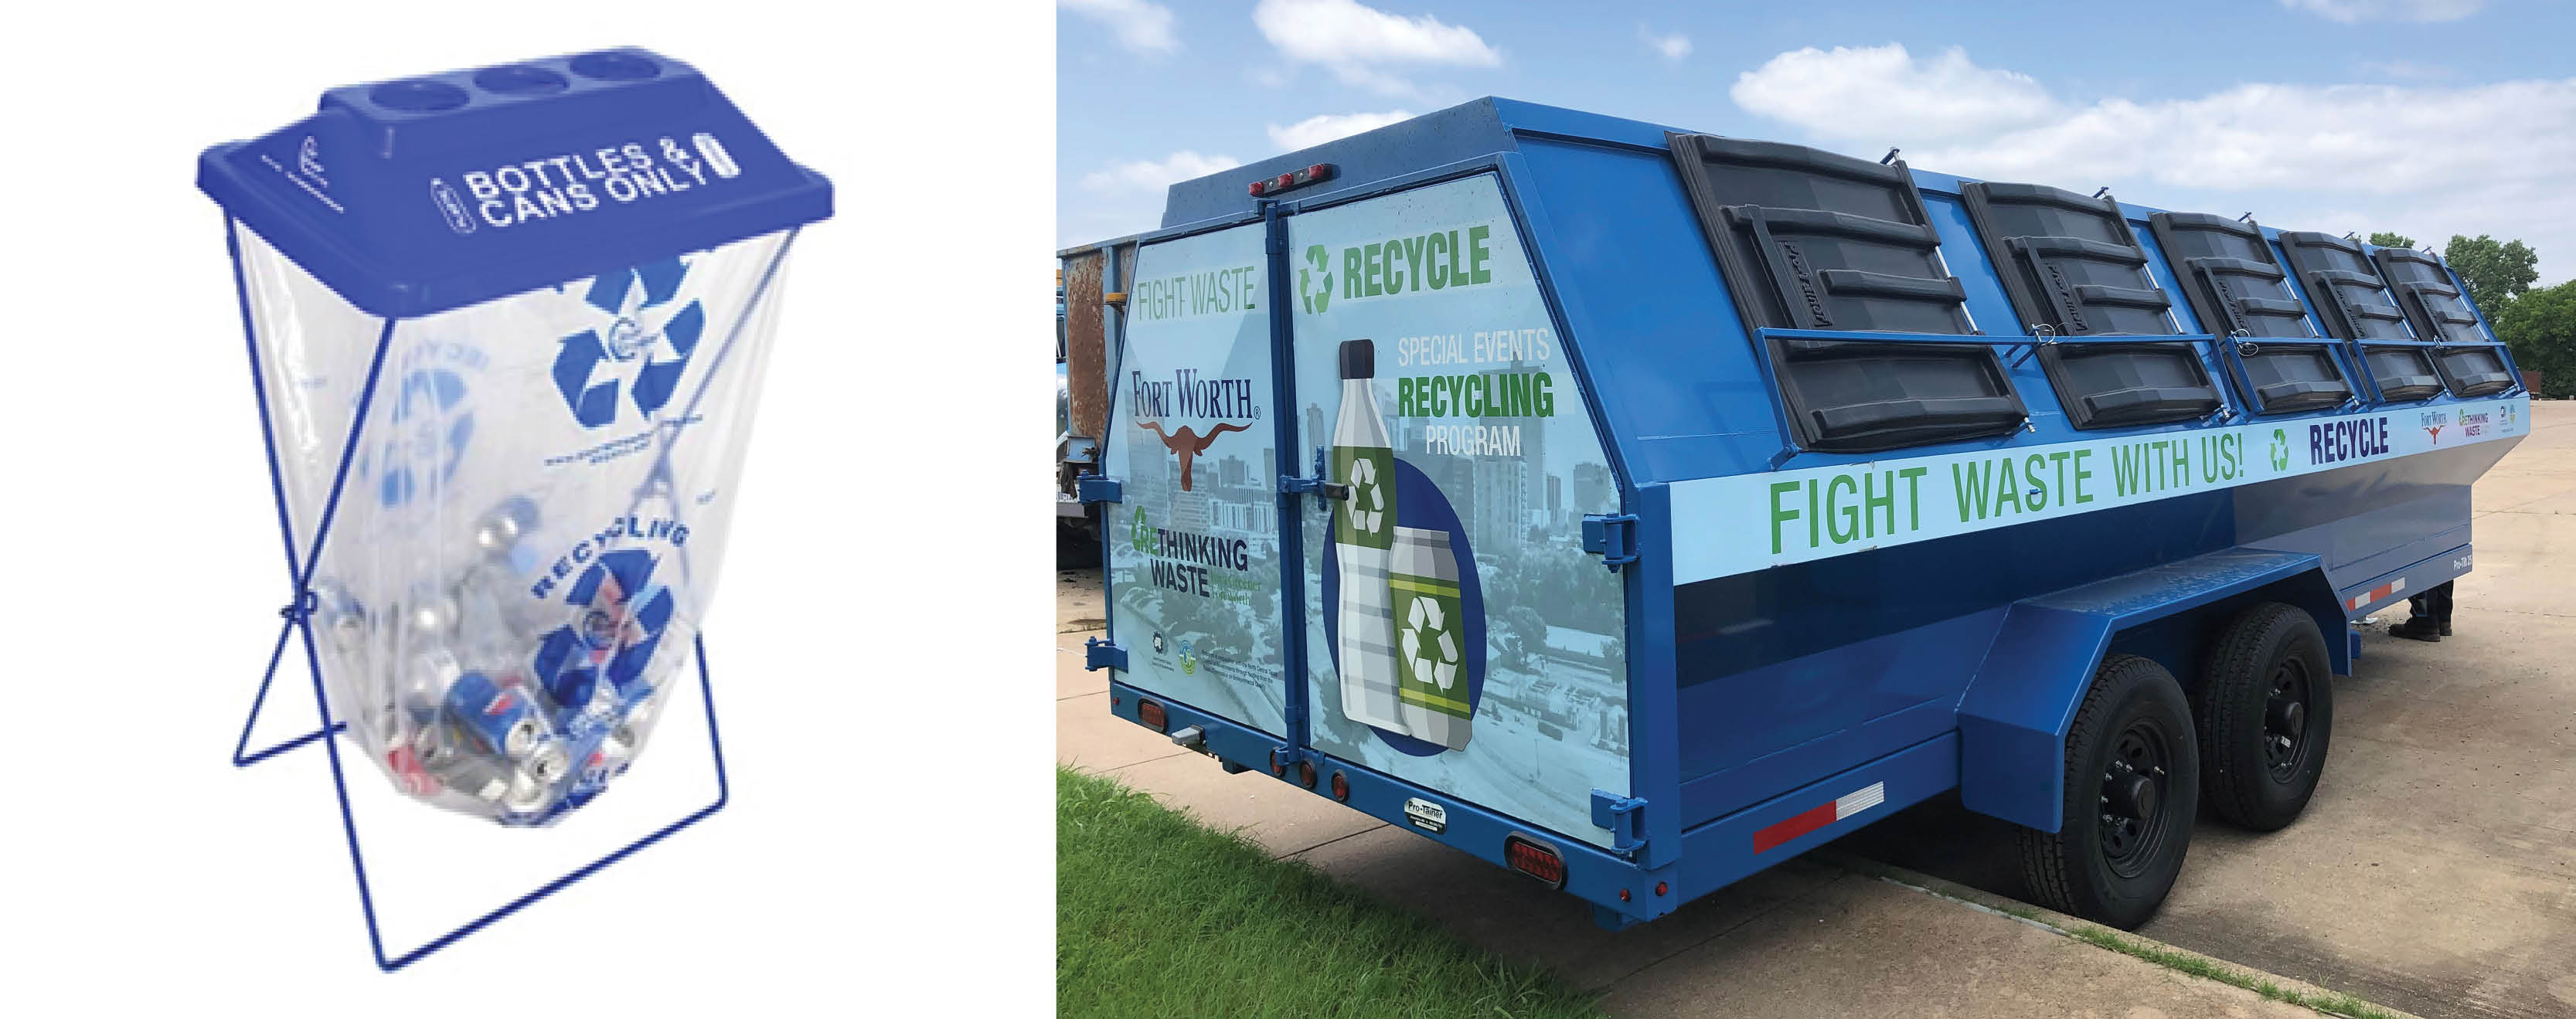 commercial-special-events-recycling-bins-trailer.jpg